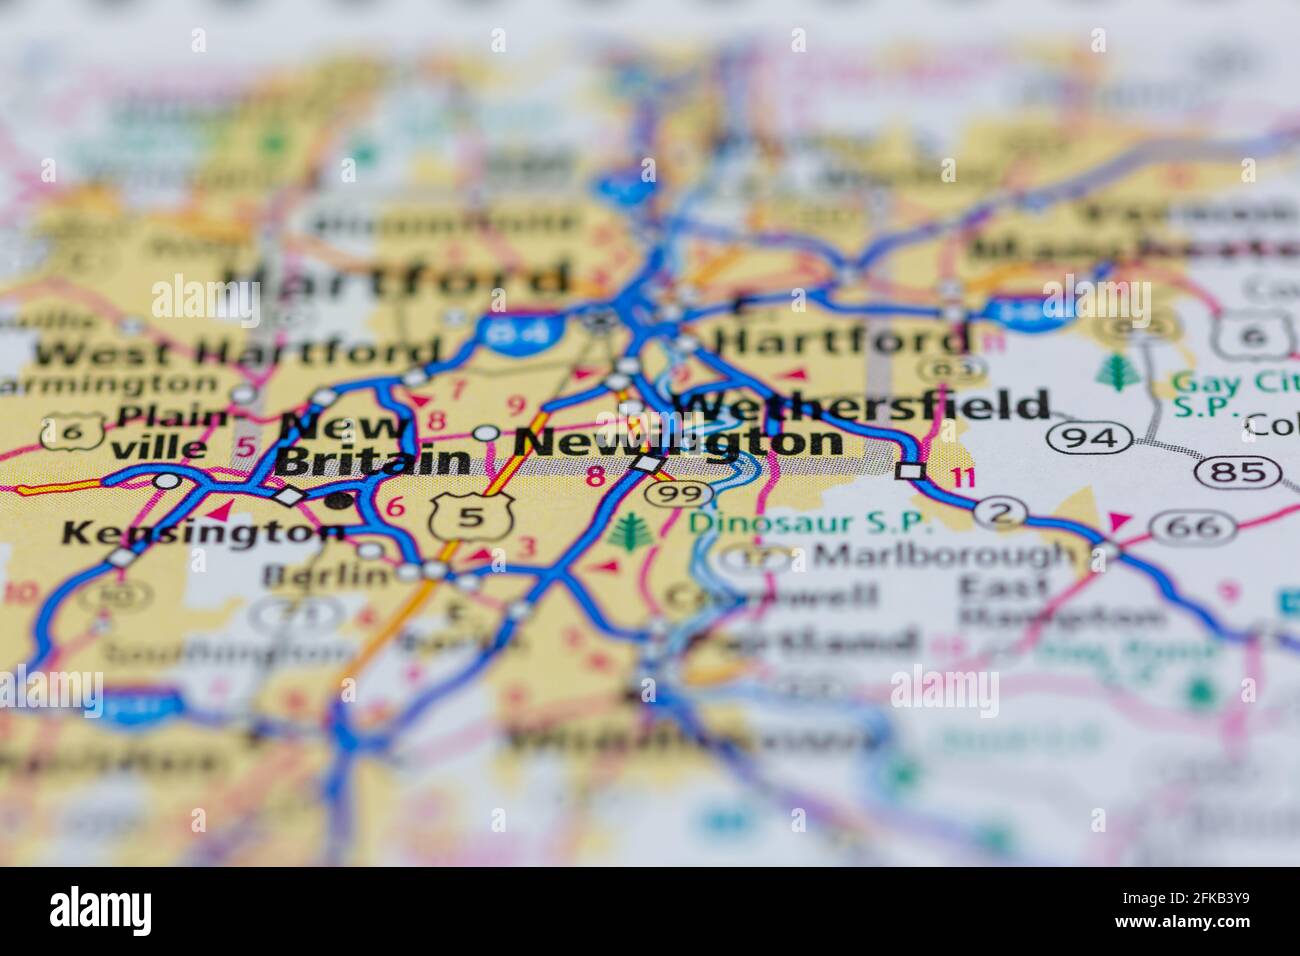 Newington Connecticut USA Shown on a geography map or road map Stock Photo